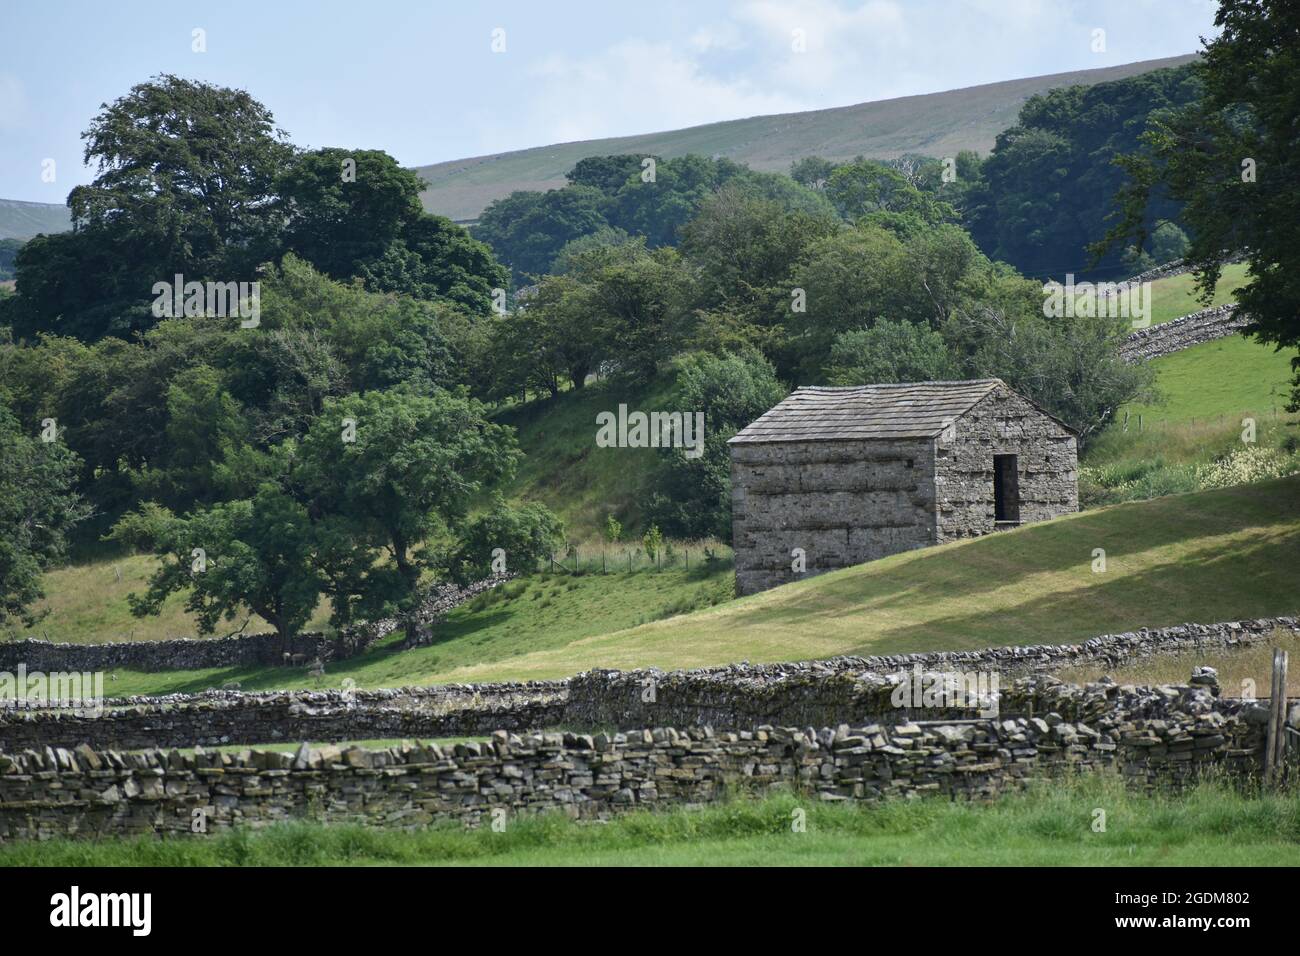 Countryside landscapes of the Yorkshire Dales Stock Photo